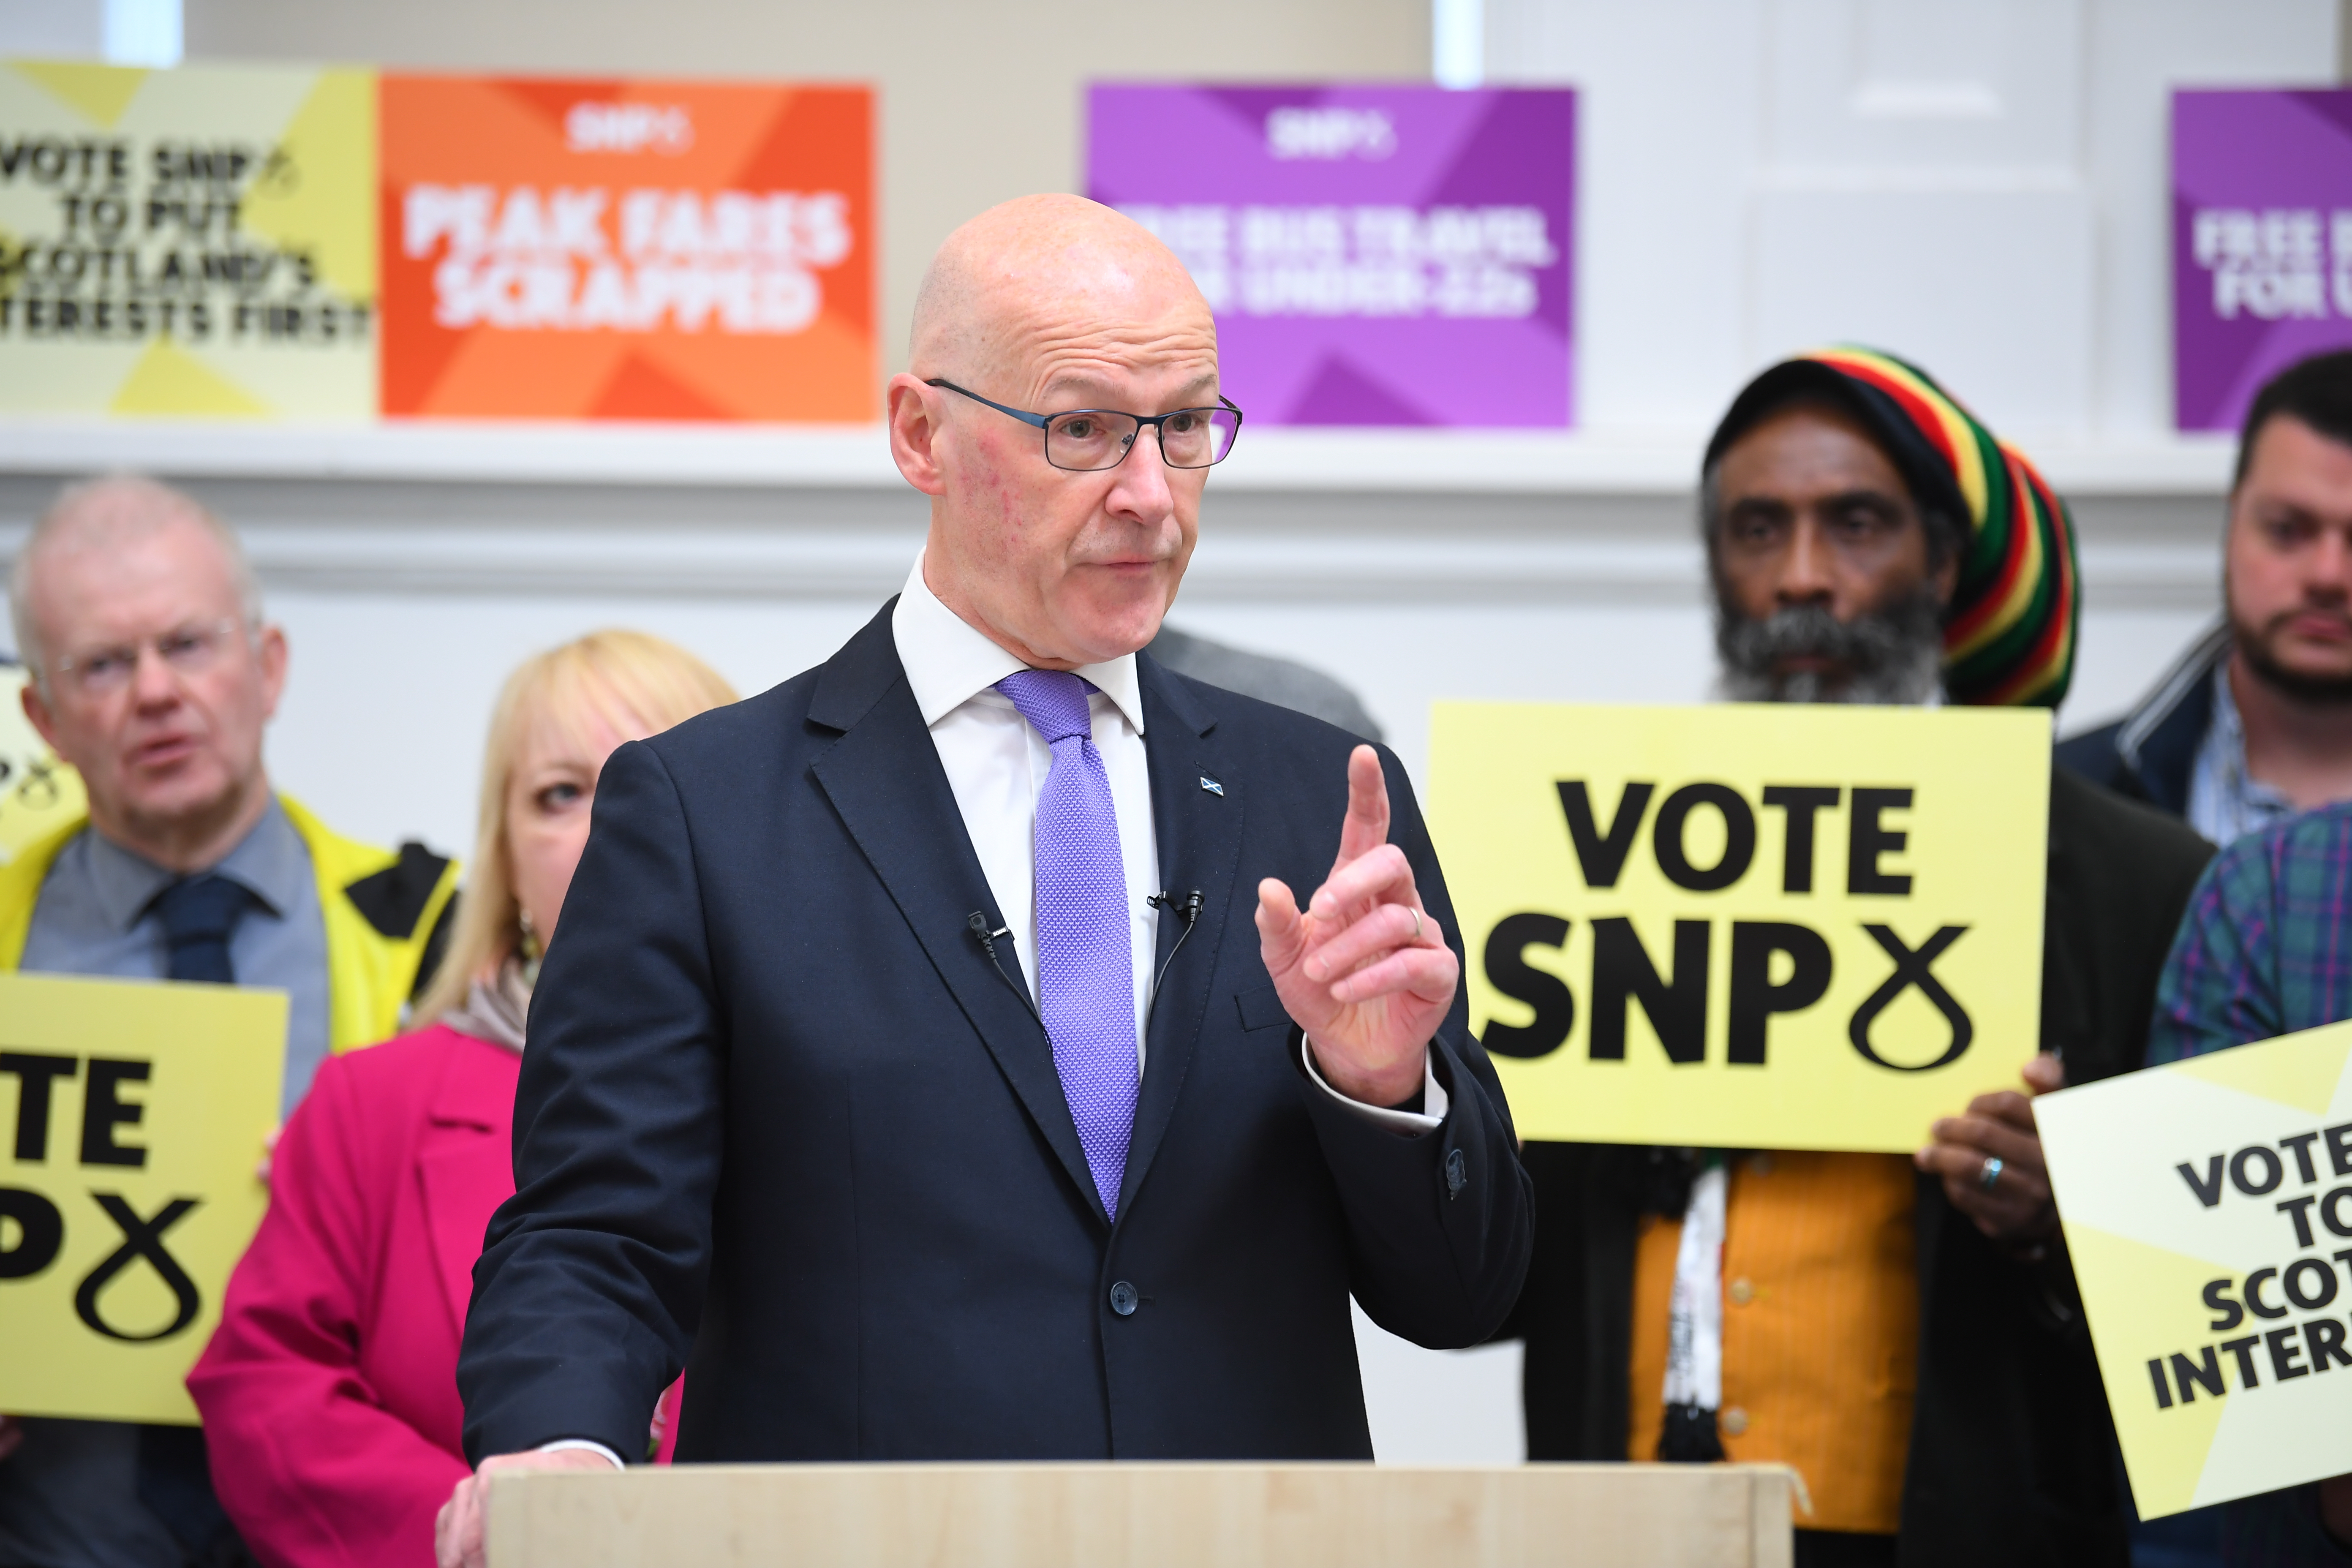 John Swinney makes a speech with SNP activists in the background